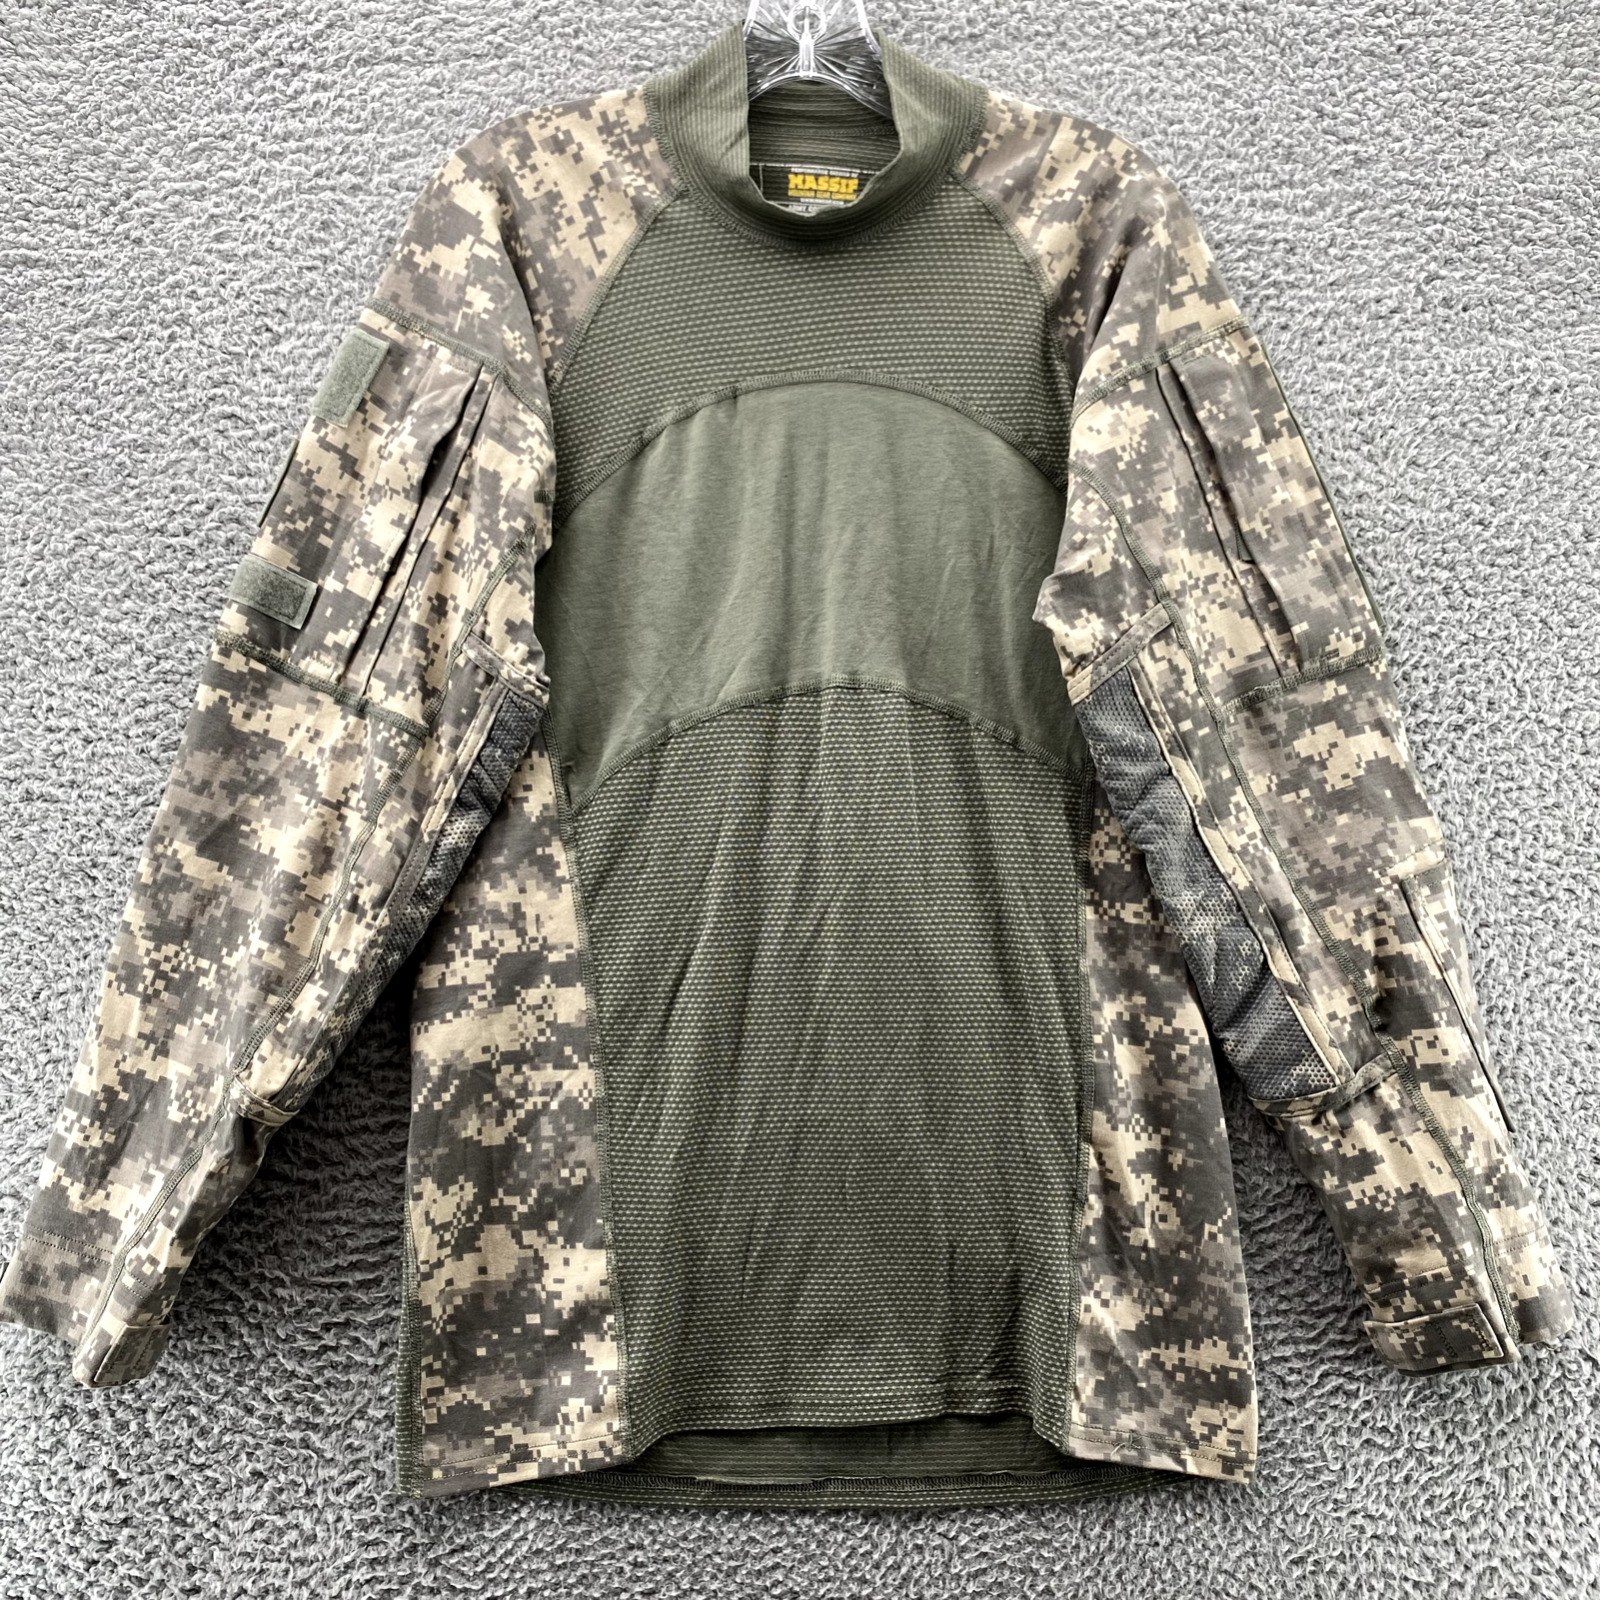 US MILITARY Small Camo Army Combat Performance Shirt  Massif Mountain Gear S Men